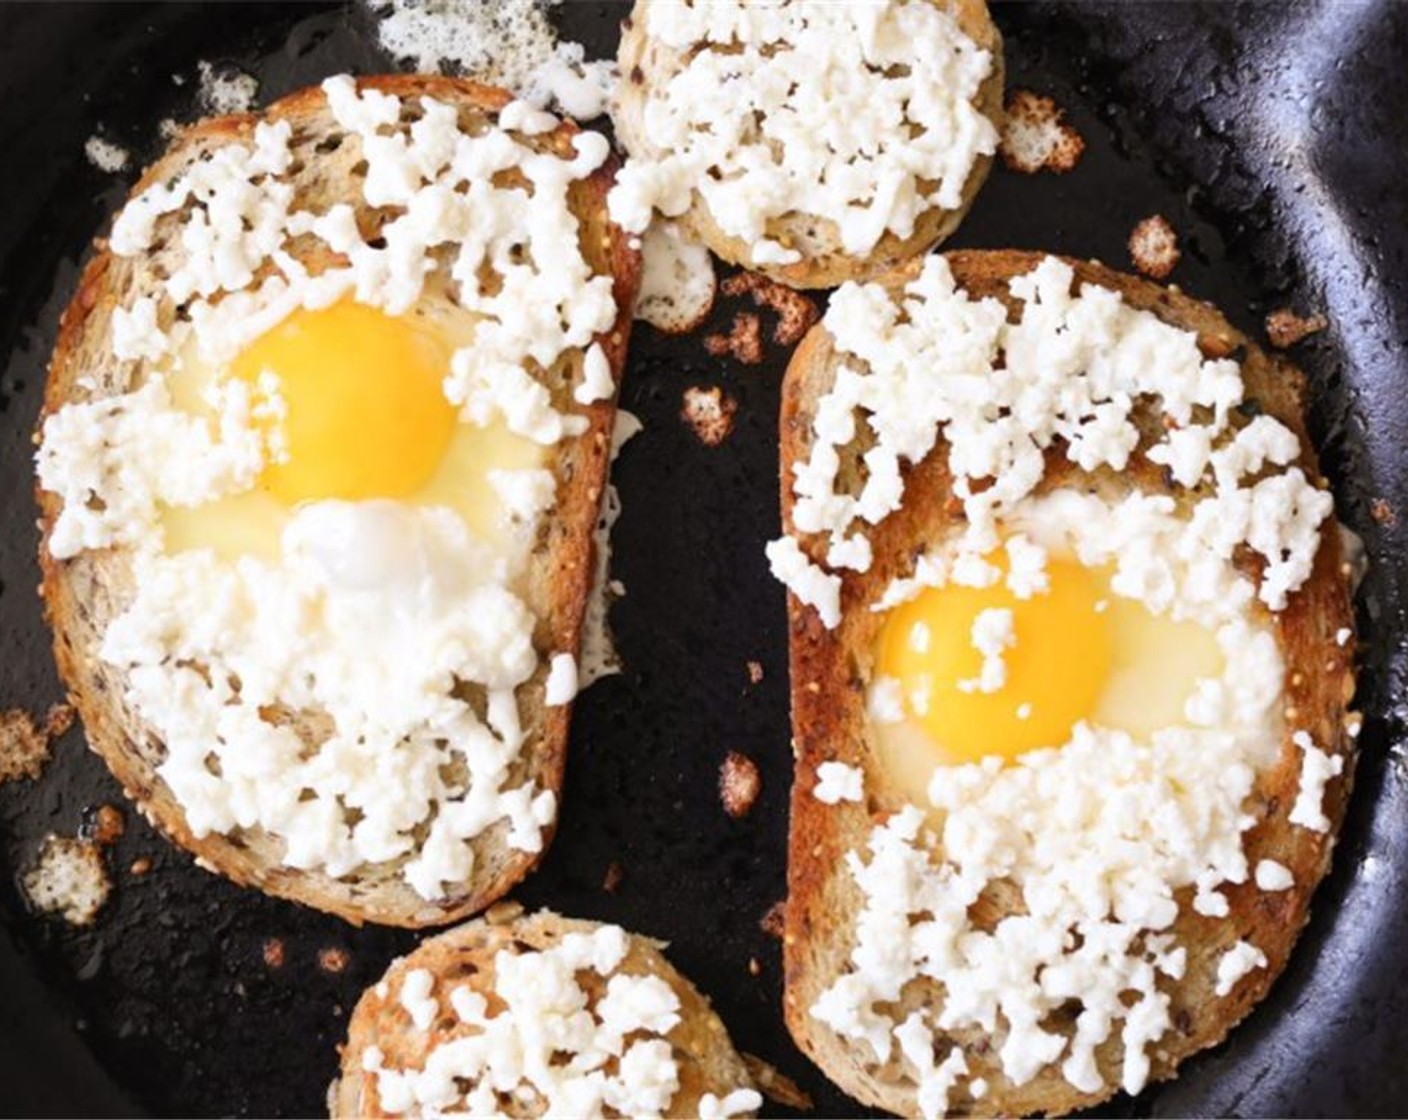 step 4 Flip the bread over and reduce the heat to medium. Crack each Farmhouse Eggs® Large Brown Eggs (2) into a small ramekin and gently pour them into the holes in the bread slices. Immediately sprinkle the bread (including the rounds) and egg with grated Fresh Mozzarella Cheese Ball (1/2 cup).